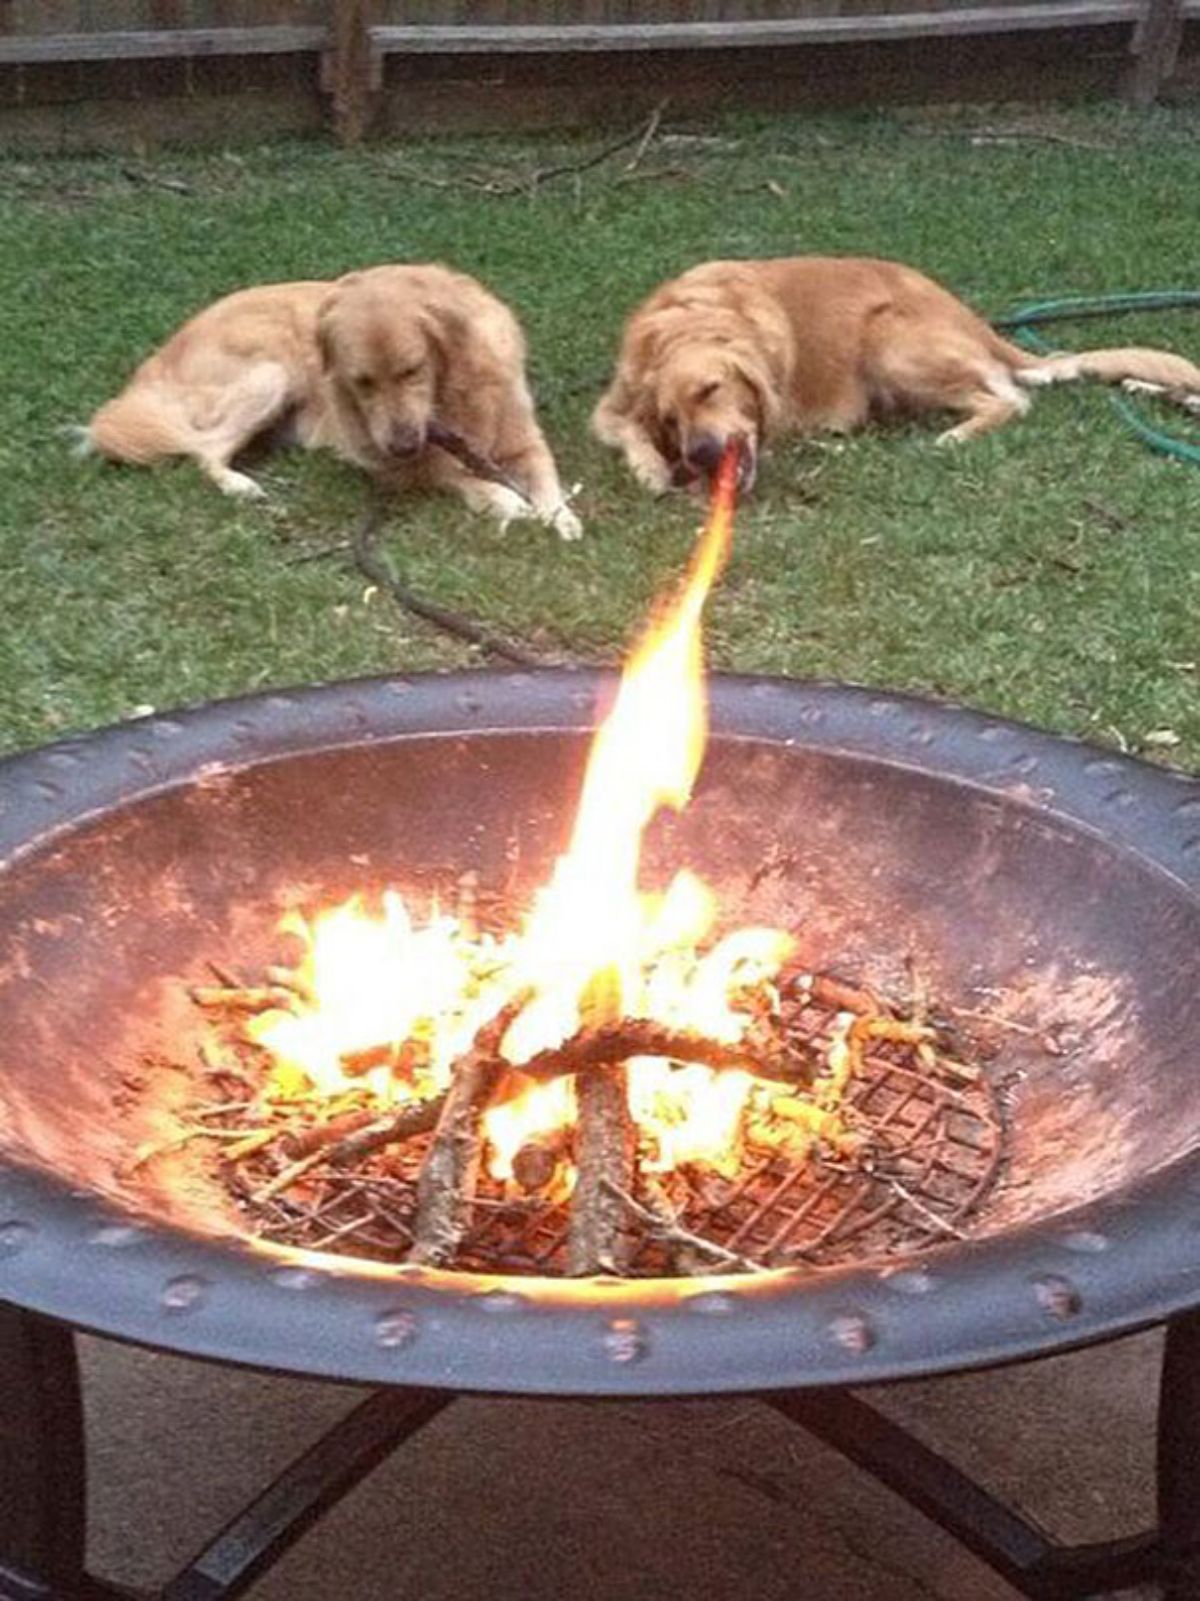 2 golden retrievers laying on grass behind a large fire in a pit with it looking like one dog has fire coming out of its mouth